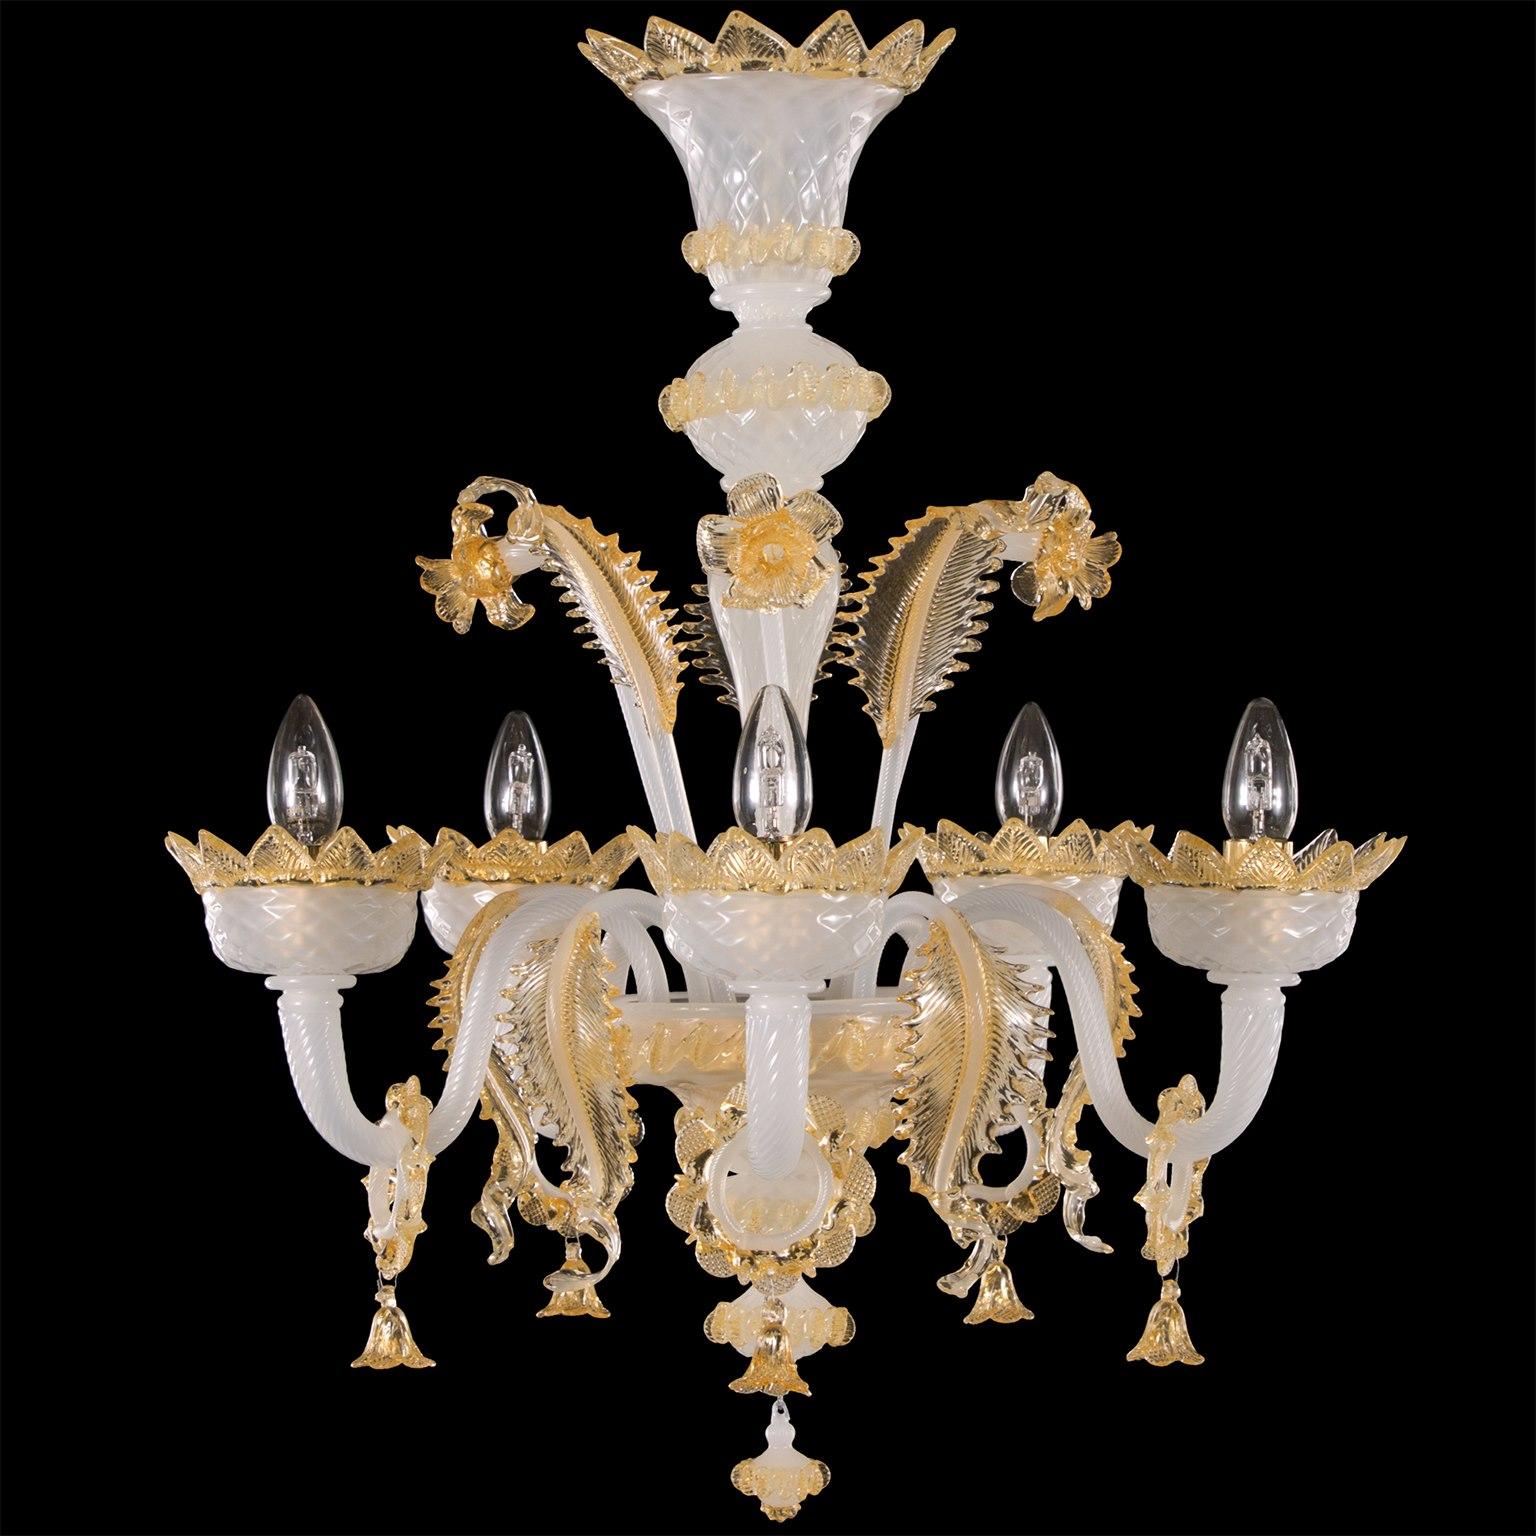 Classic Chandelier 5 Arms white silk Murano Glass details amber by Multiforme.
The classic Murano glass chandelier, as it is in the collective imagination. As many other chandeliers in our collections, V-Classic 800 is designed with attention to